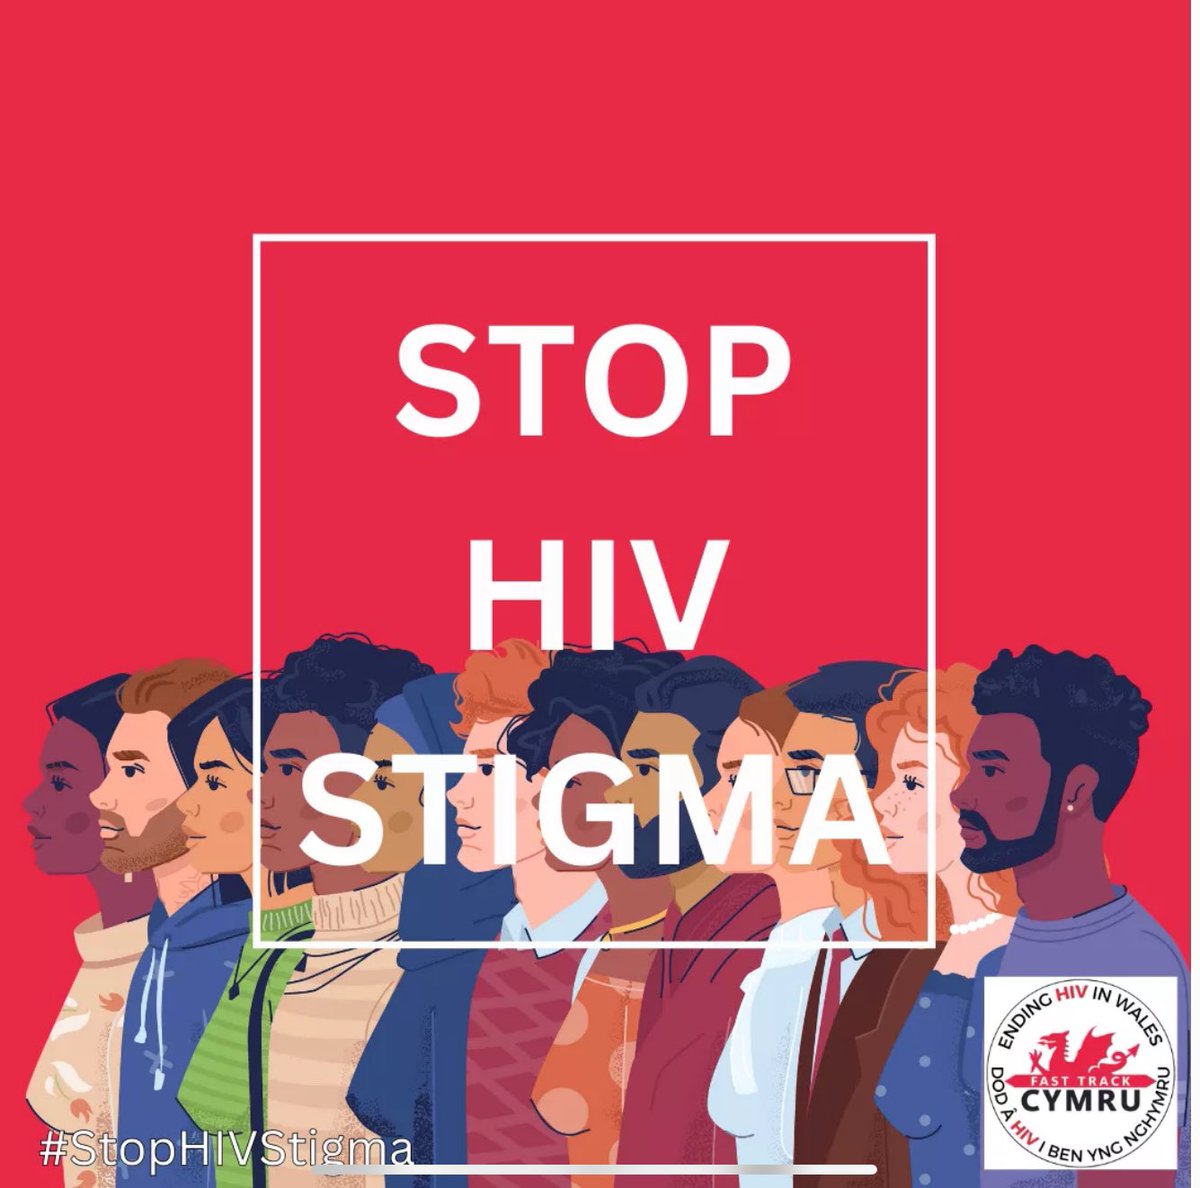 Whilst so much as changed in the management of #HIV #Stigma remains #StopHIVStigma #StopioStigmaHIV Find out more ⬇️ fasttrack.wales/stop-hiv-stigm…